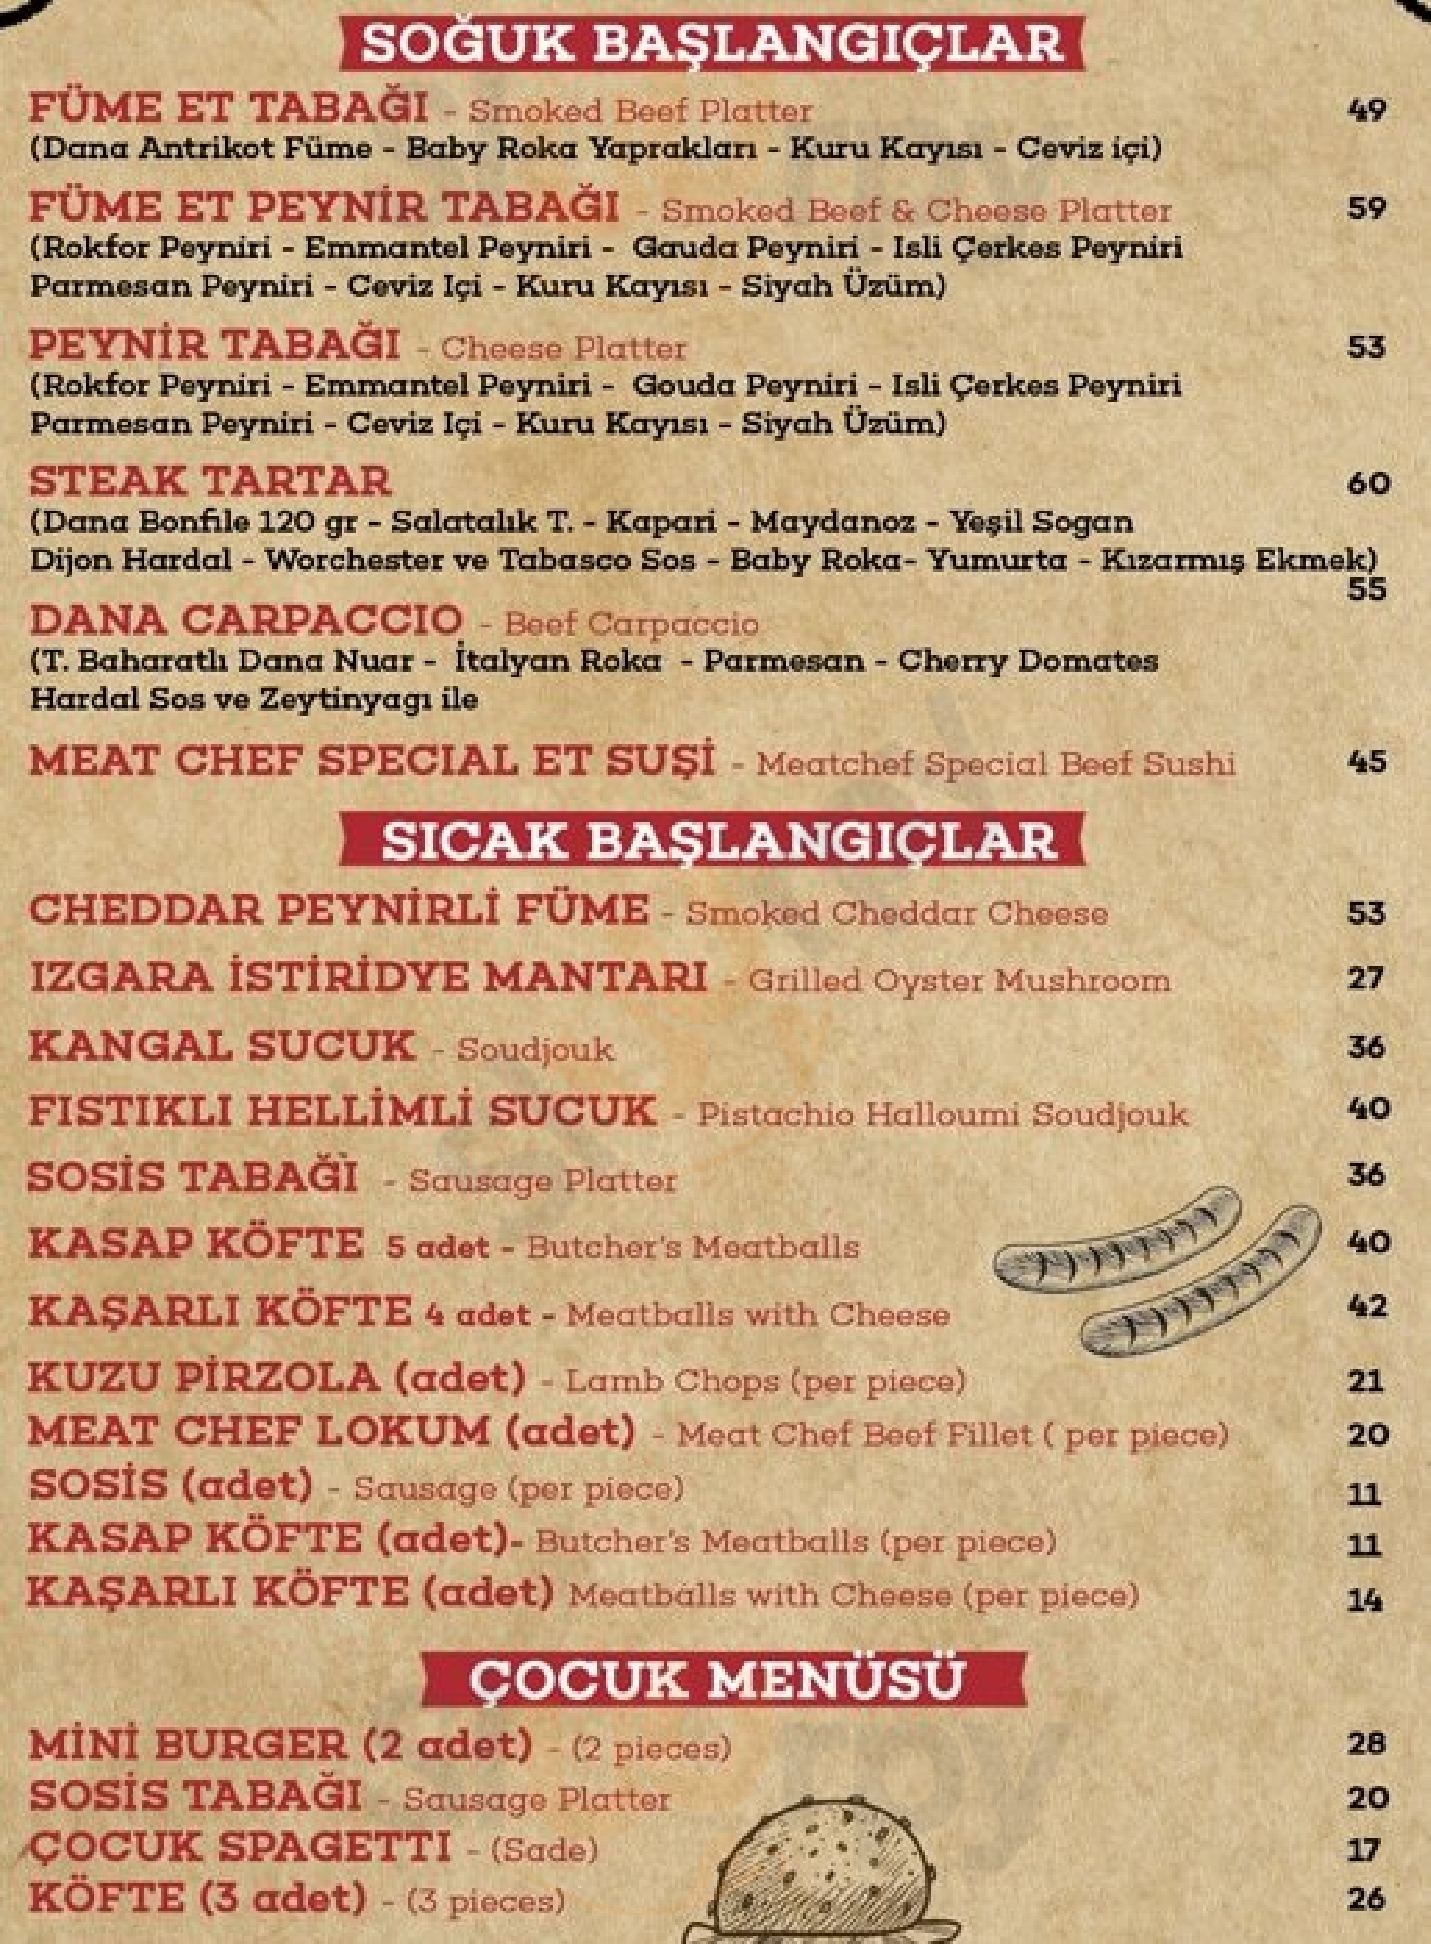 Meat Chef Steakhouse İstanbul Menu - 1